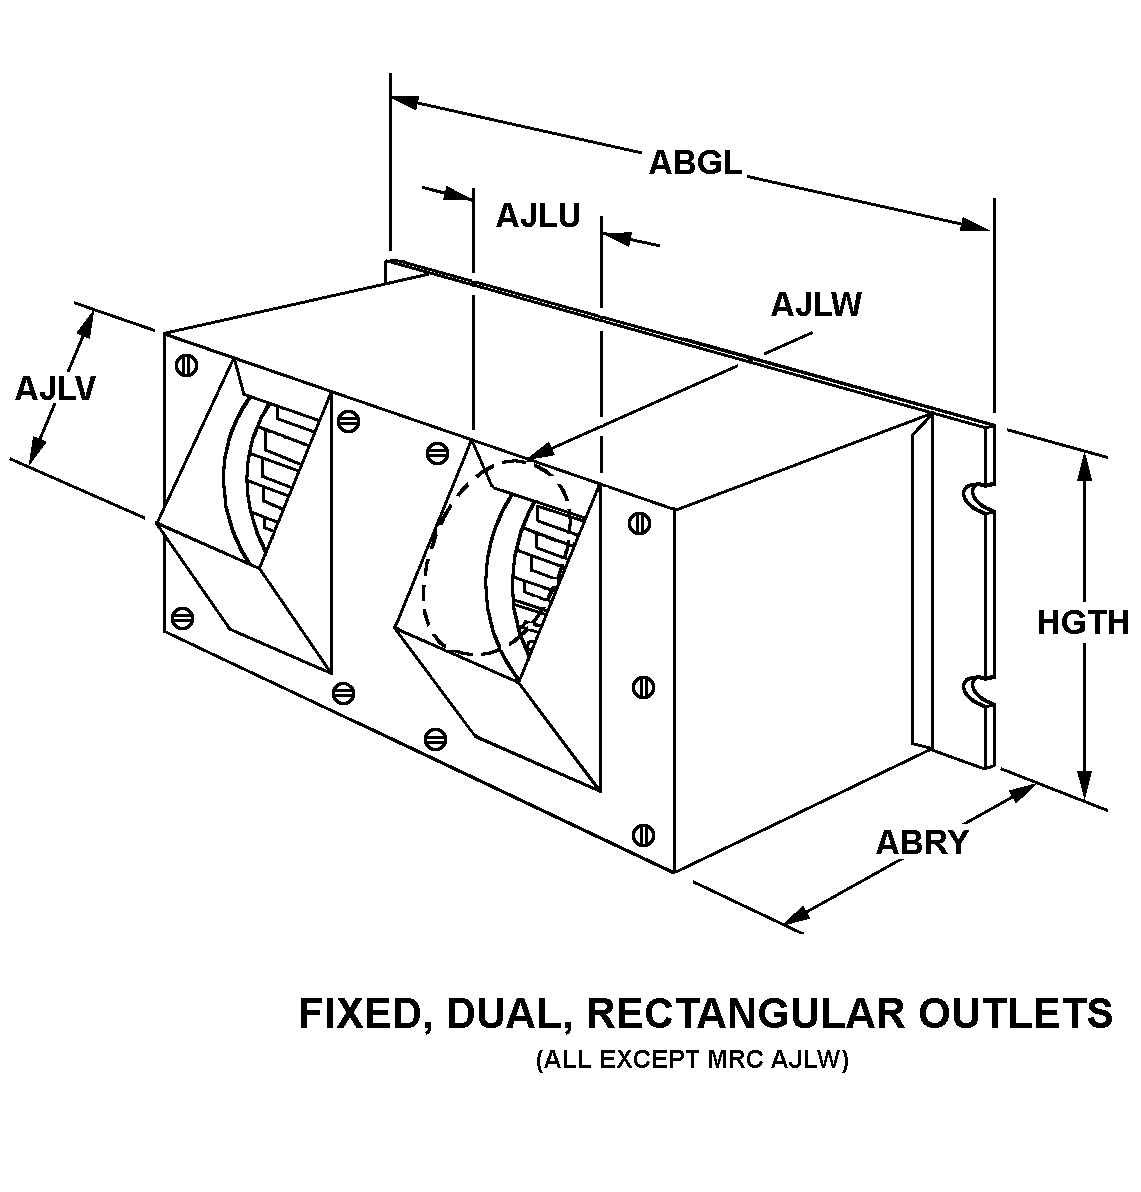 FIXED, DUAL, RECTANGULAR OUTLETS style nsn 4140-01-317-7079